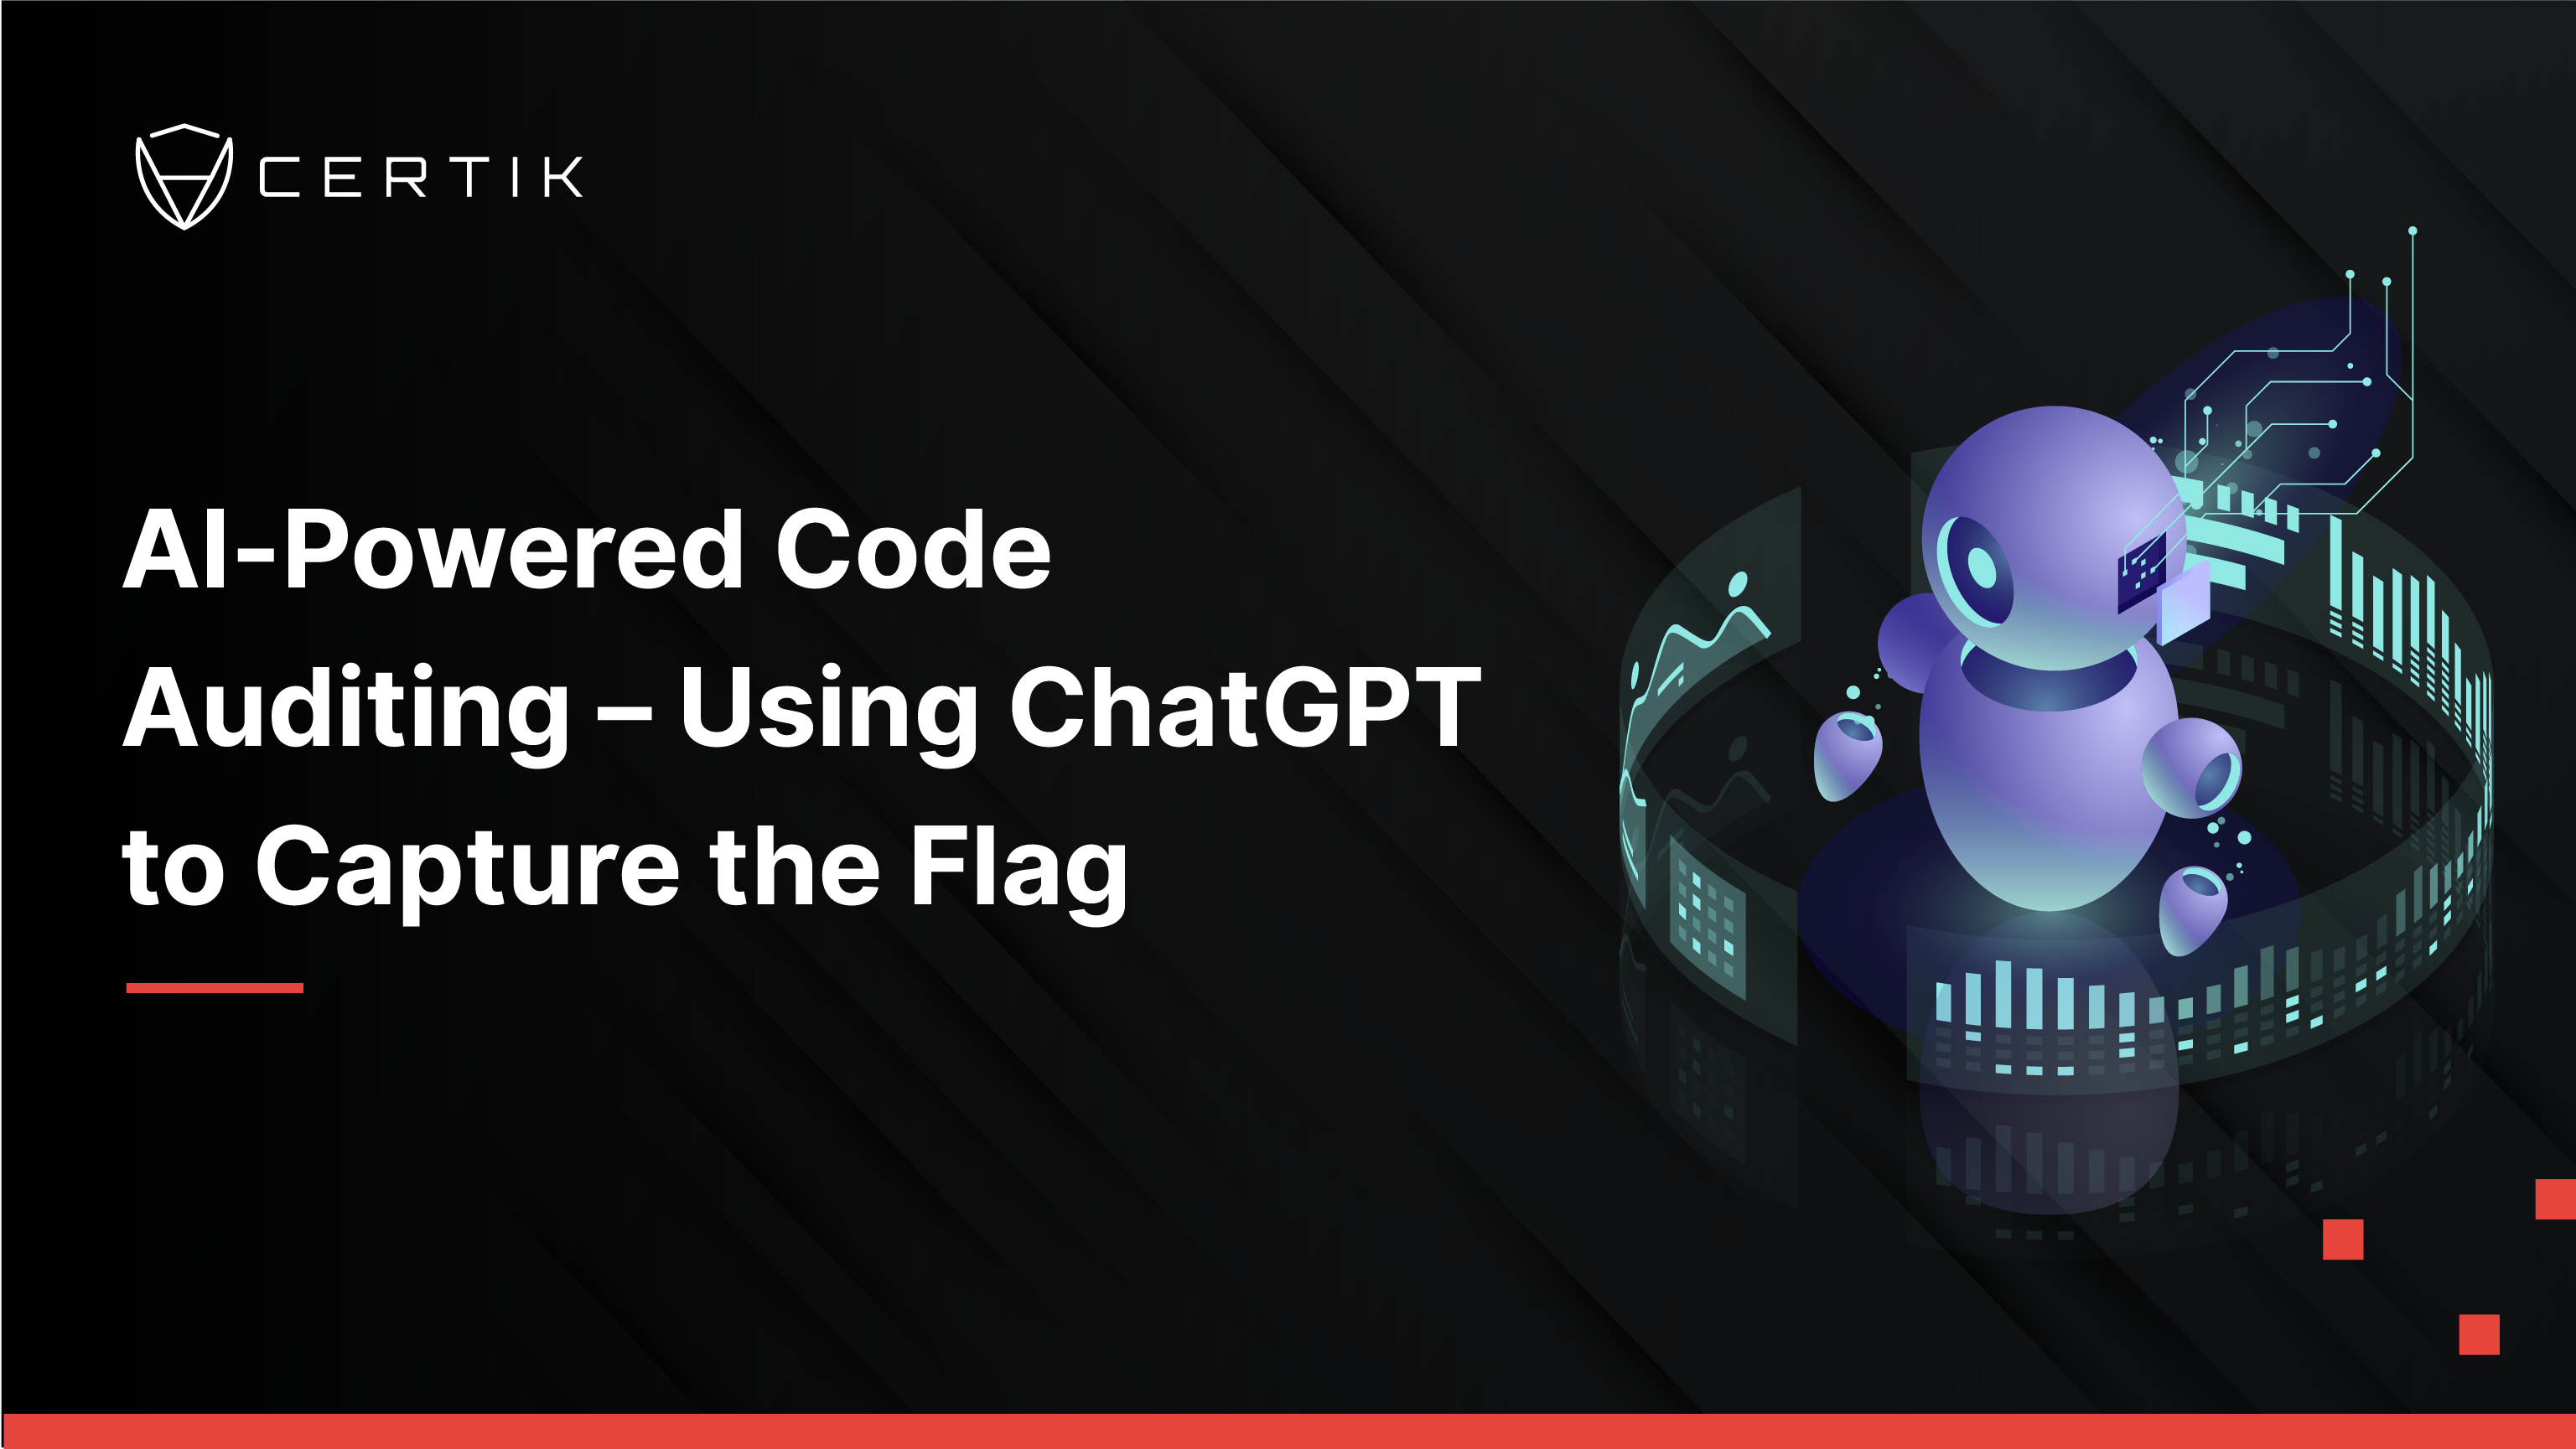 AI-Powered Code Auditing – Using ChatGPT to Capture the Flag